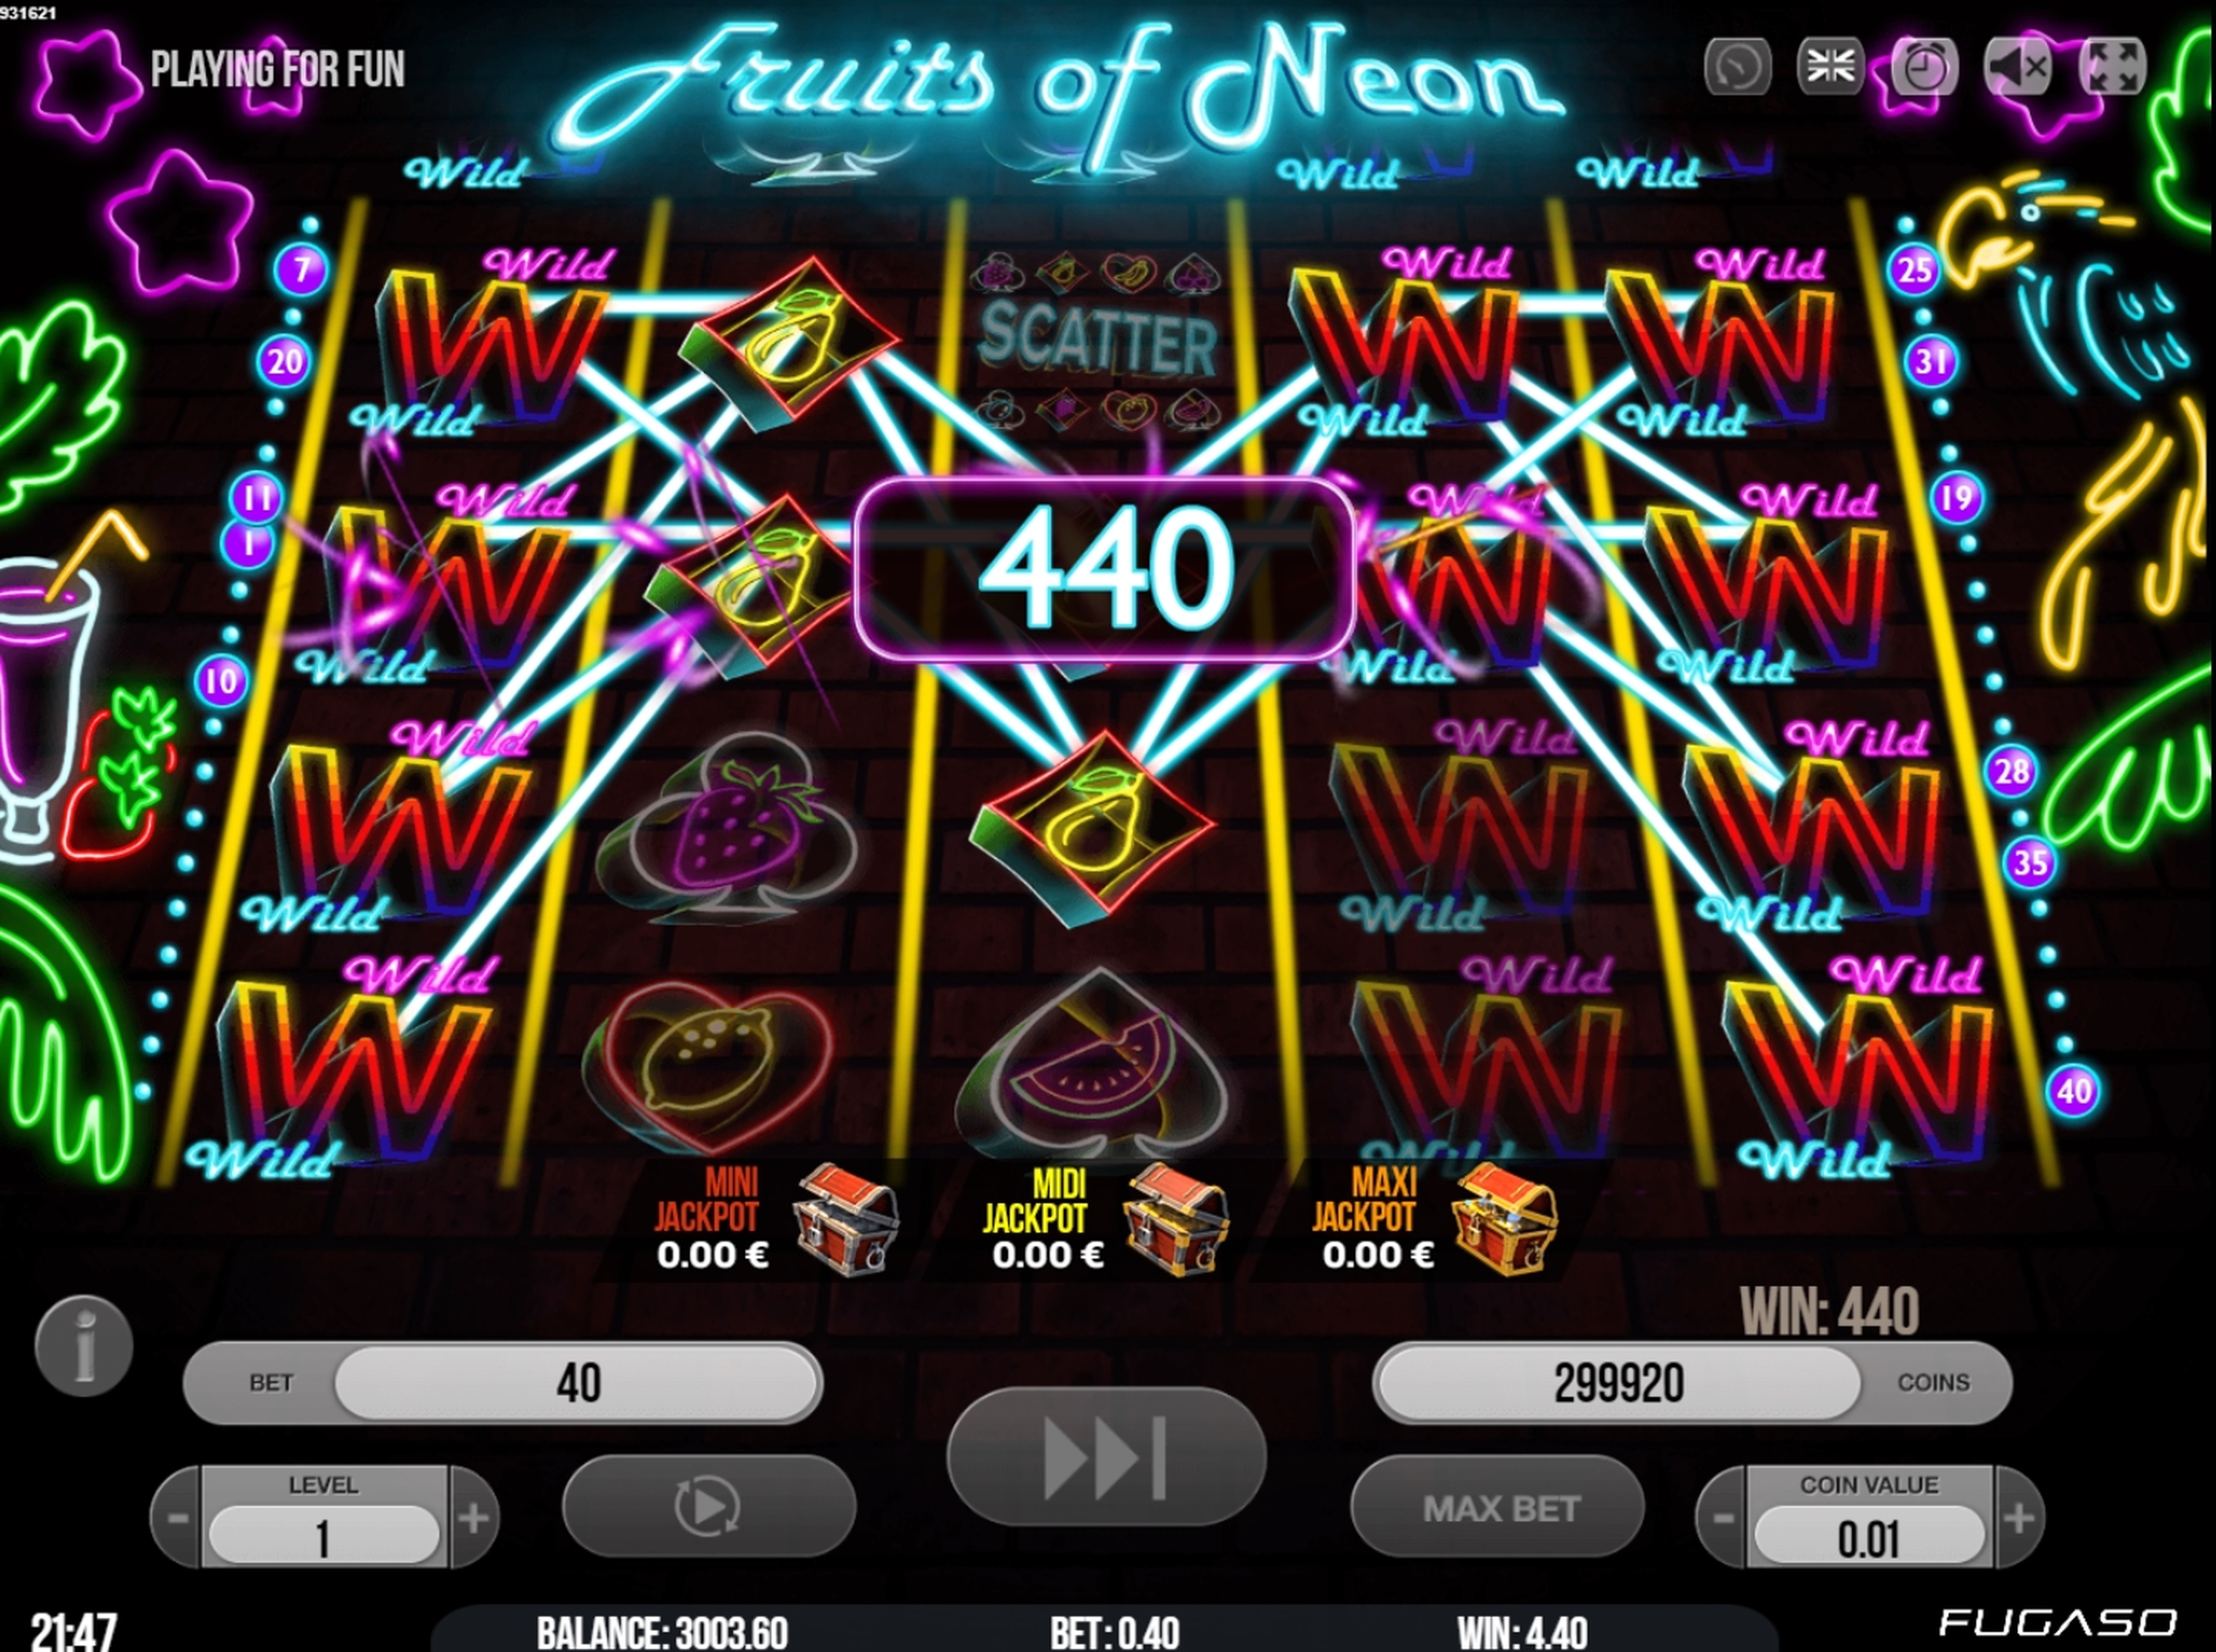 Win Money in Fruits of Neon Free Slot Game by Fugaso